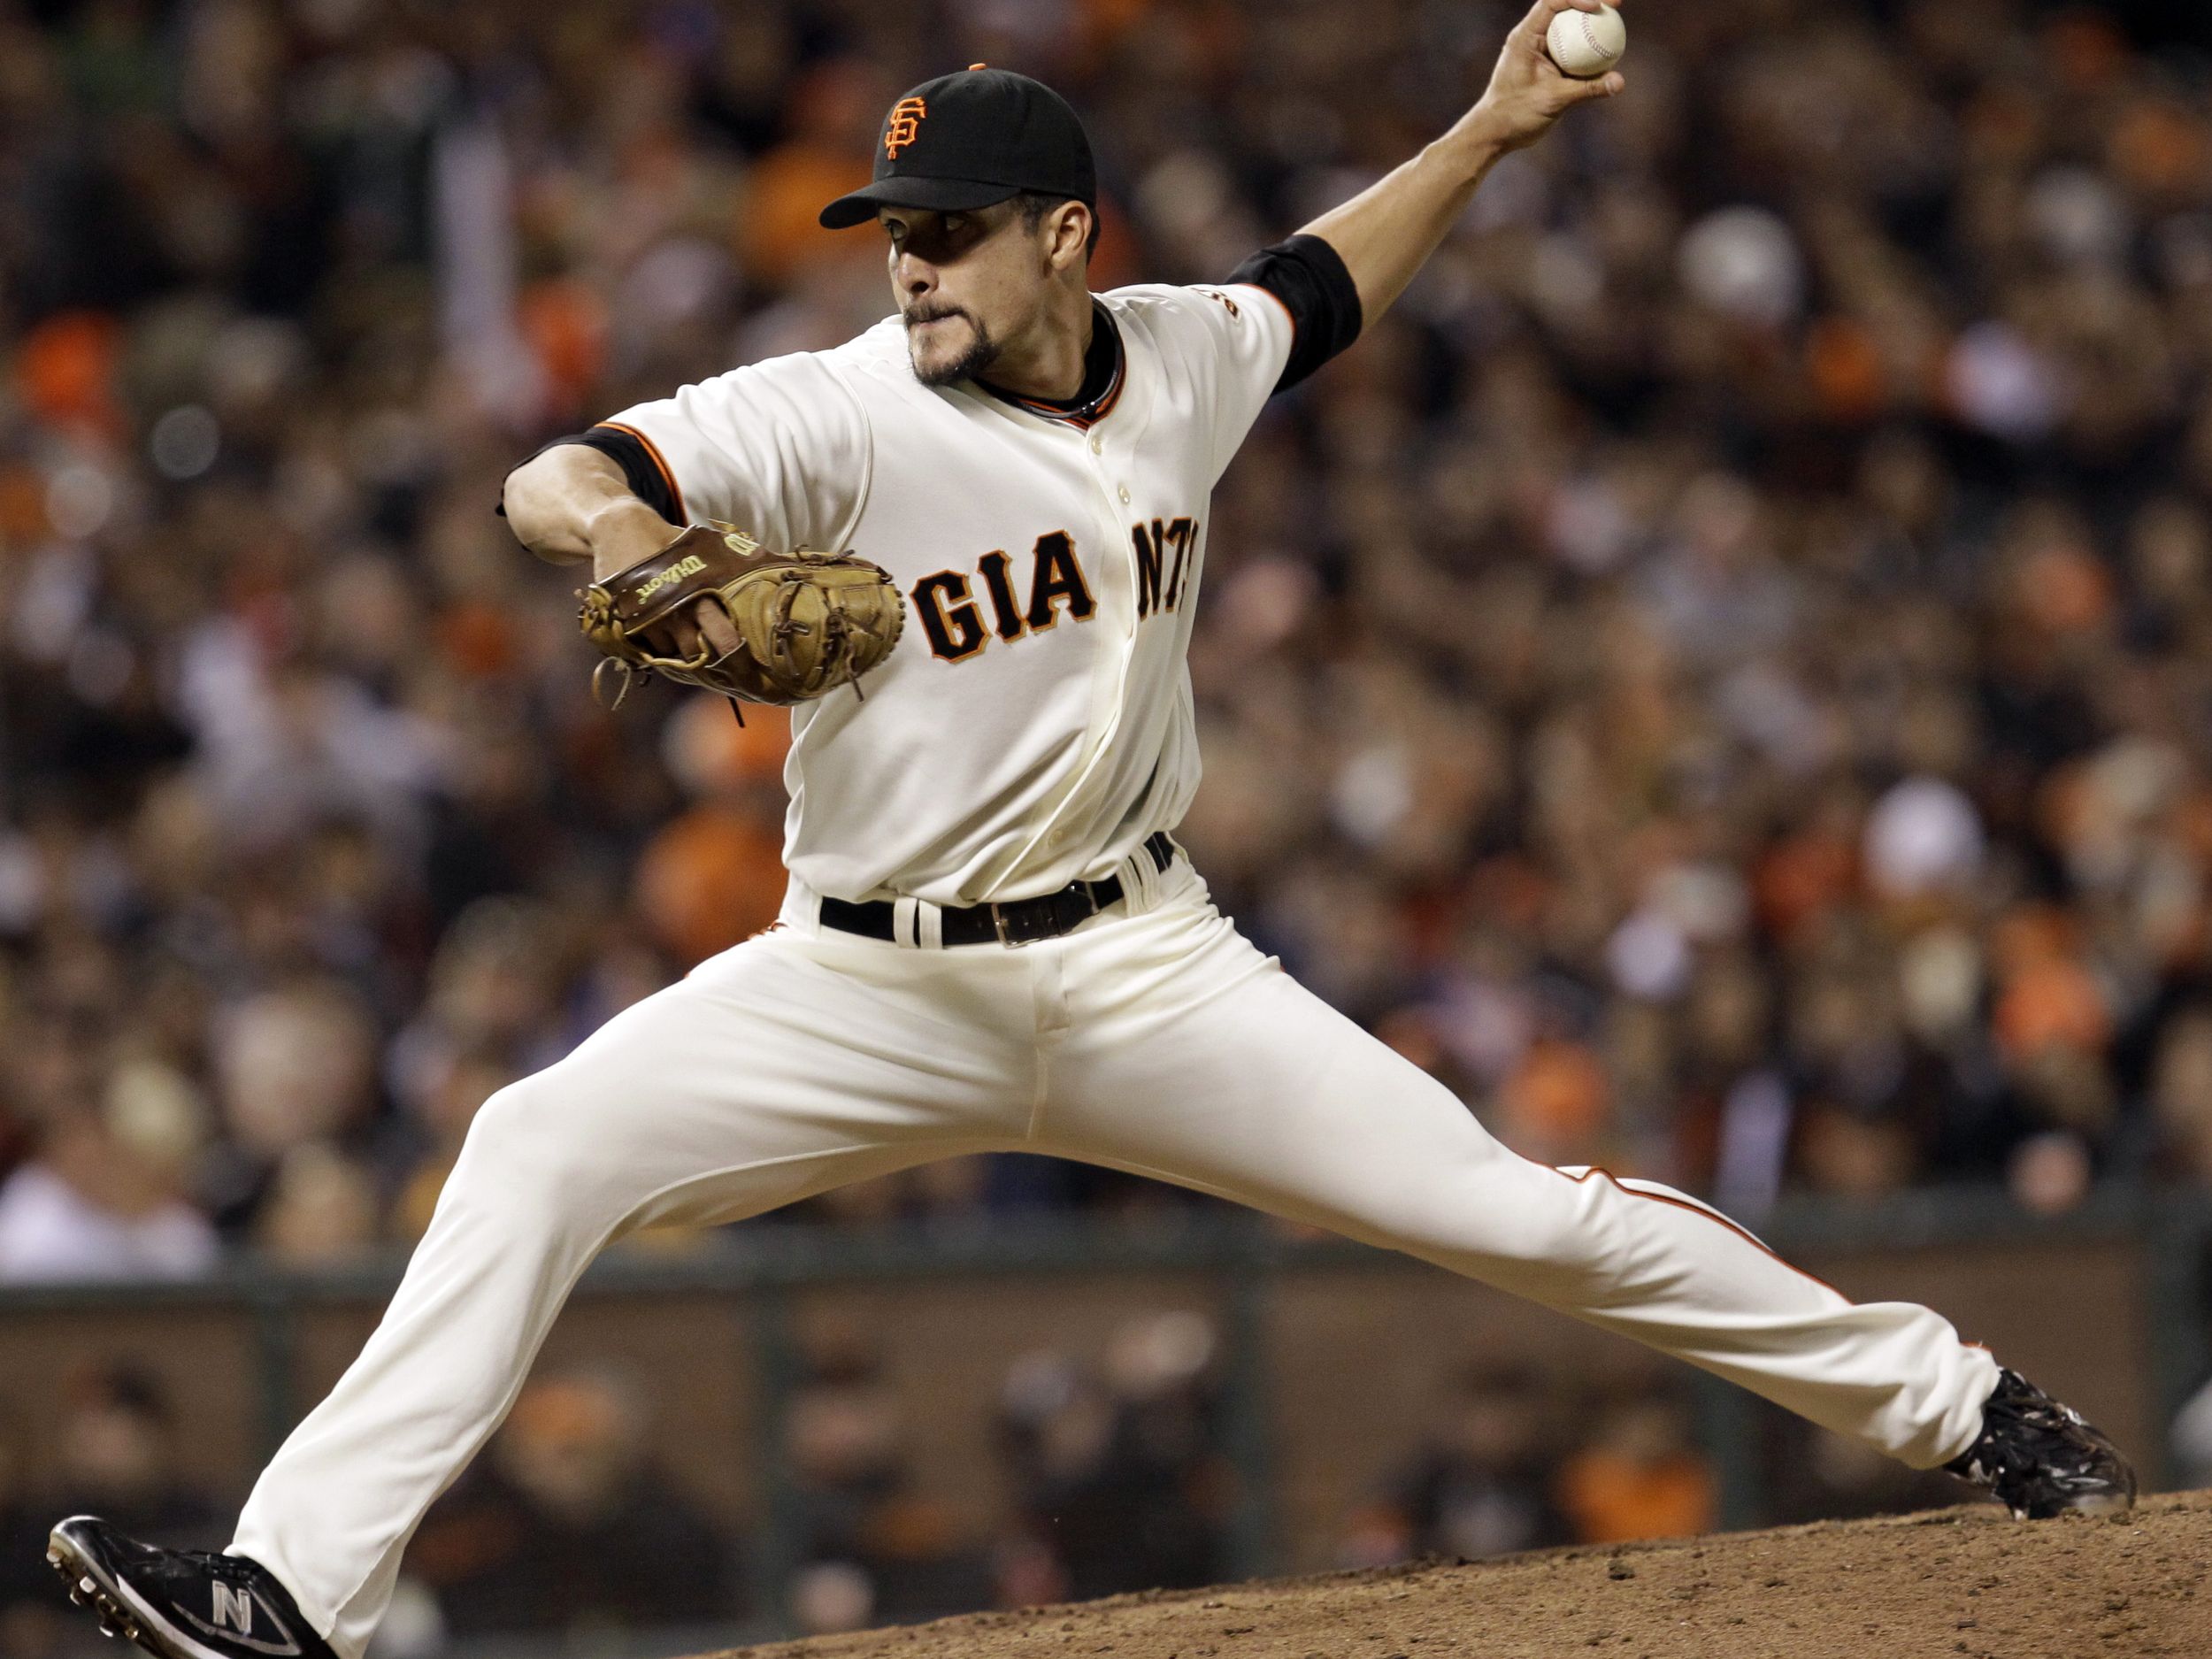 Giants lefty reliever Javier Lopez improving with age – The